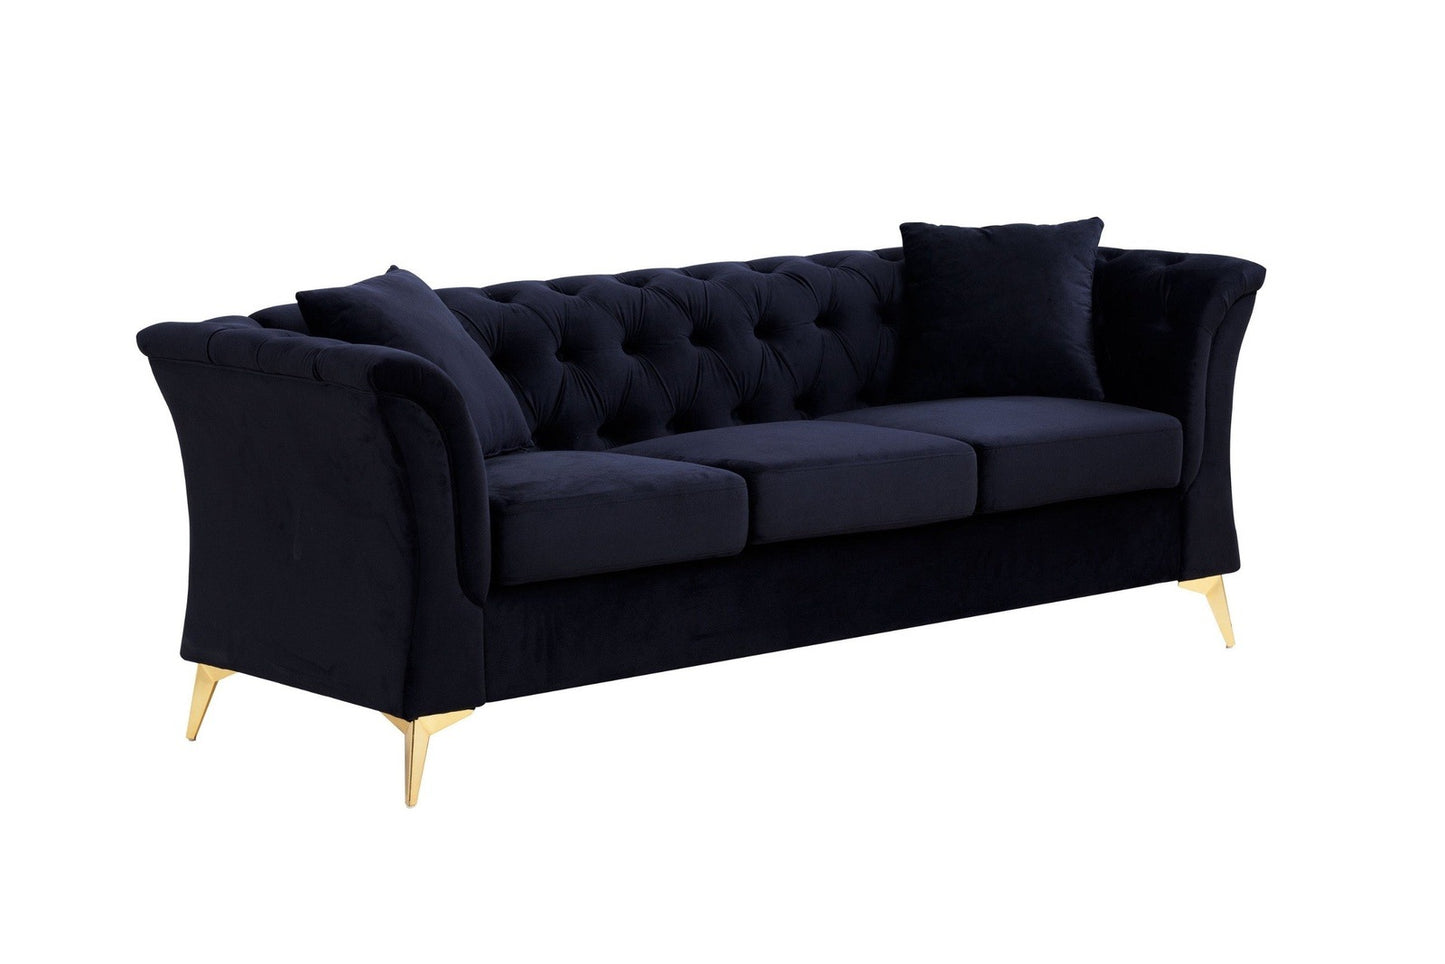 Modern Chesterfield Curved Sofa Tufted Velvet Couch 3 Seat Button Tufed Couch with Scroll Arms and Gold Metal Legs Black